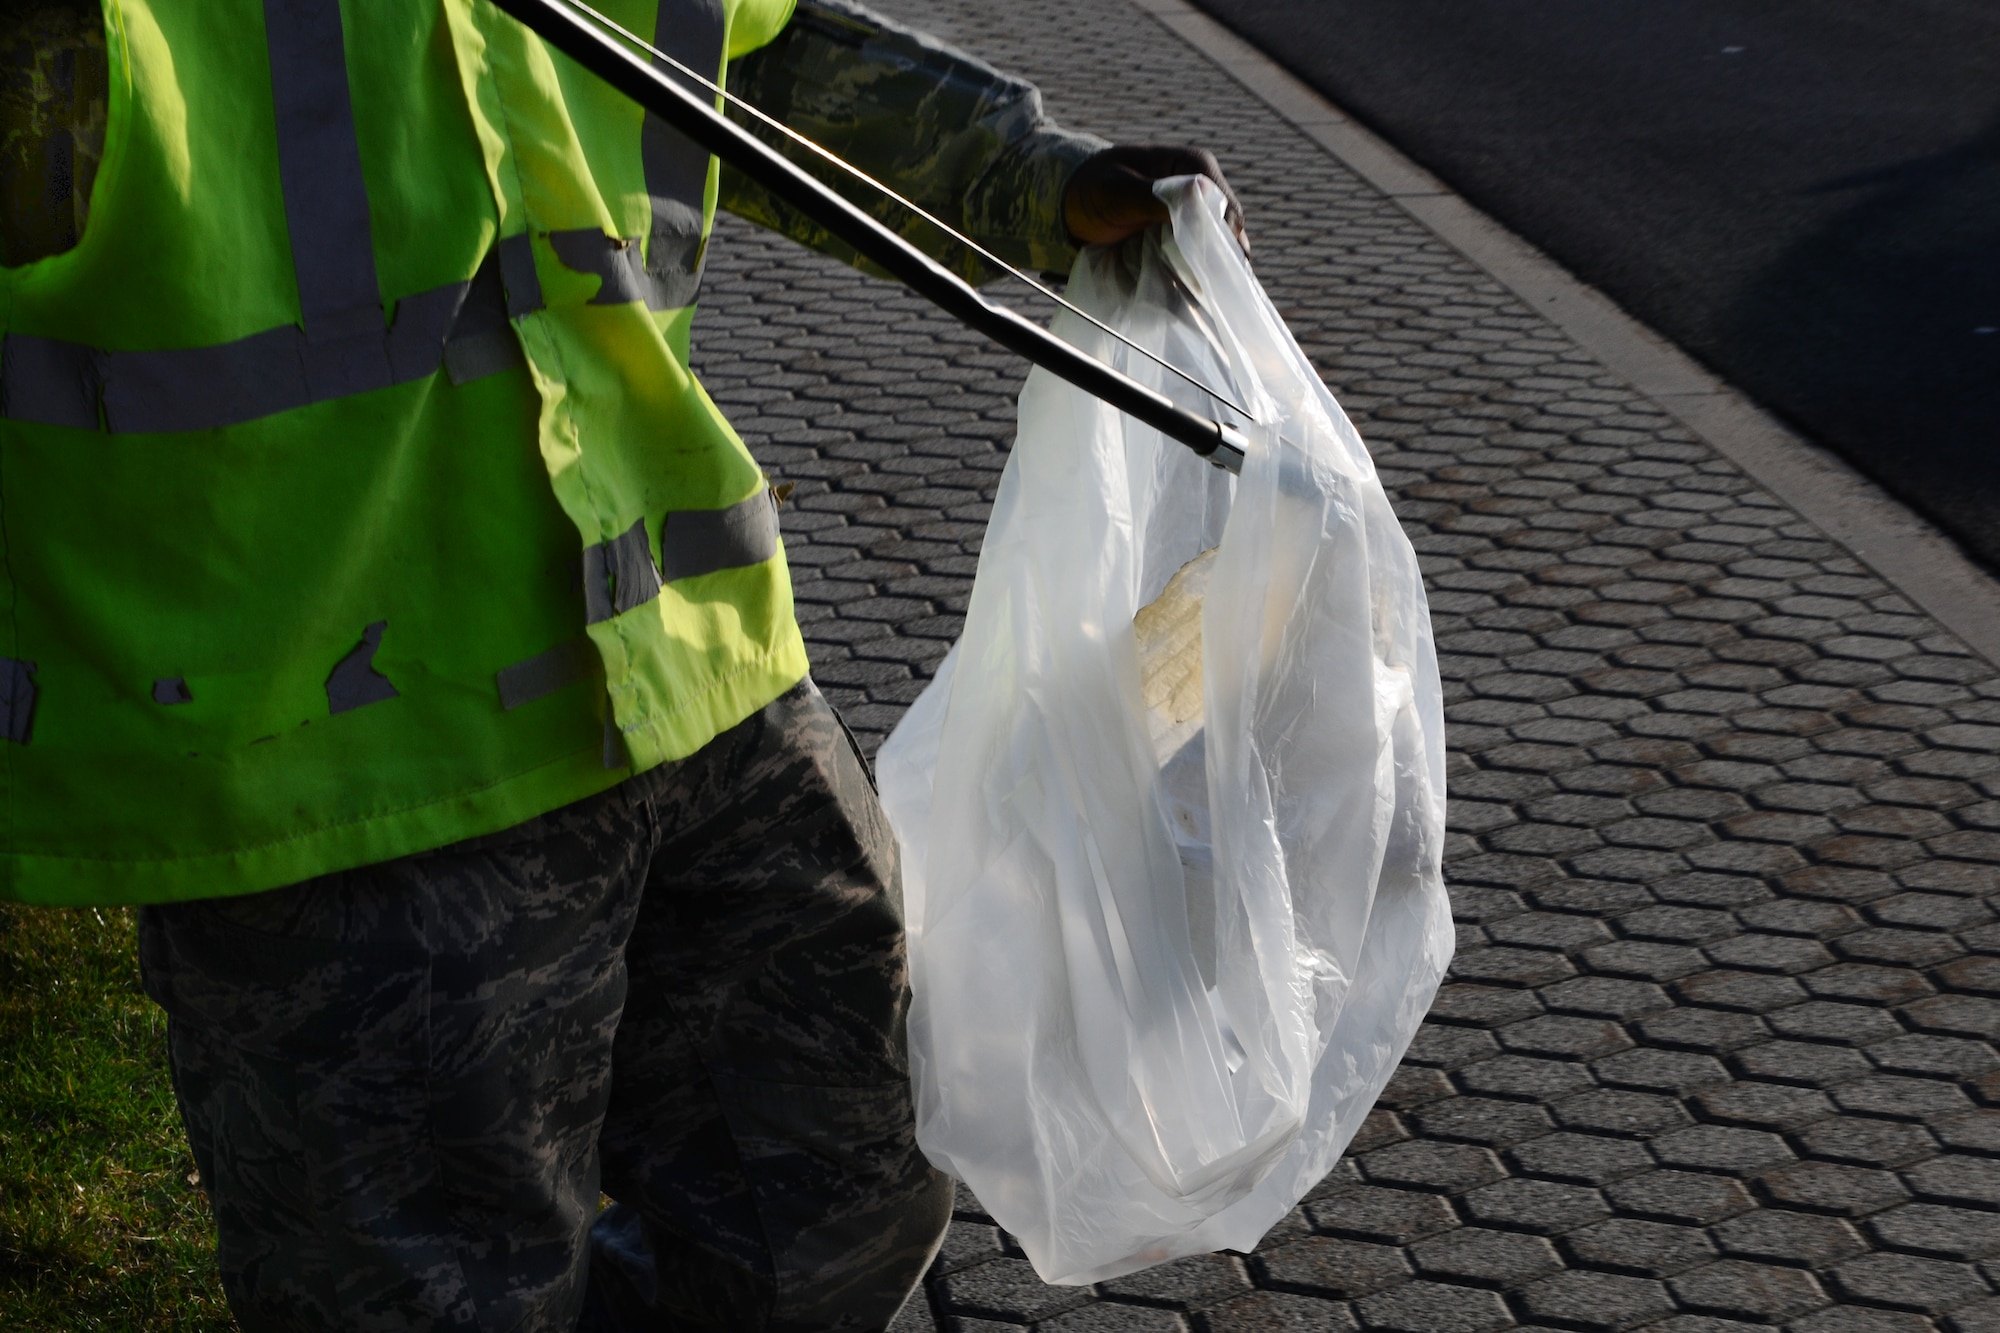 SPANGDAHLEM AIR BASE, Germany – Airman 1st Class Brian Darden, 52nd Logistics Readiness Squadron customer service apprentice, puts a piece of paper in a garbage bag during his morning Eifel Pride trash route near Arnold Boulevard here April 3. Eifel Pride is a mandatory two-week program for first-term Airmen stationed here immediately following initial technical training school. The program helps Airmen become oriented to the base, allows them to finish their in-processing and aids in the ongoing 52nd Fighter Wing goal of becoming United States Air Forces in Europe’s most environmentally-friendly wing. (U.S. Air Force photo by Airman 1st Class Dillon Davis/Released)